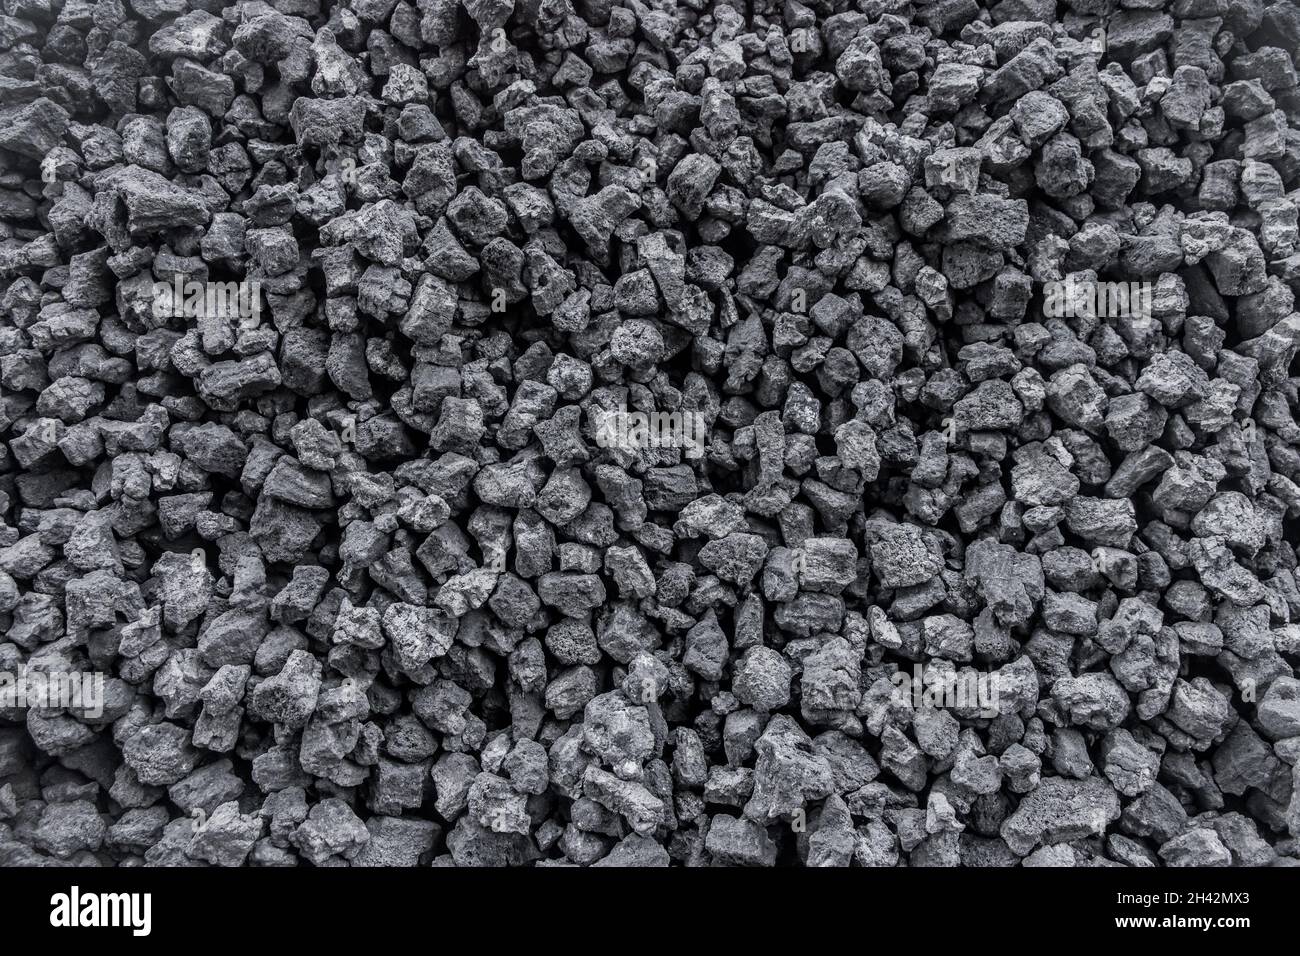 Black Fossil Coking Coal Fuel for Metal Smelting Texture Background. Stock Photo